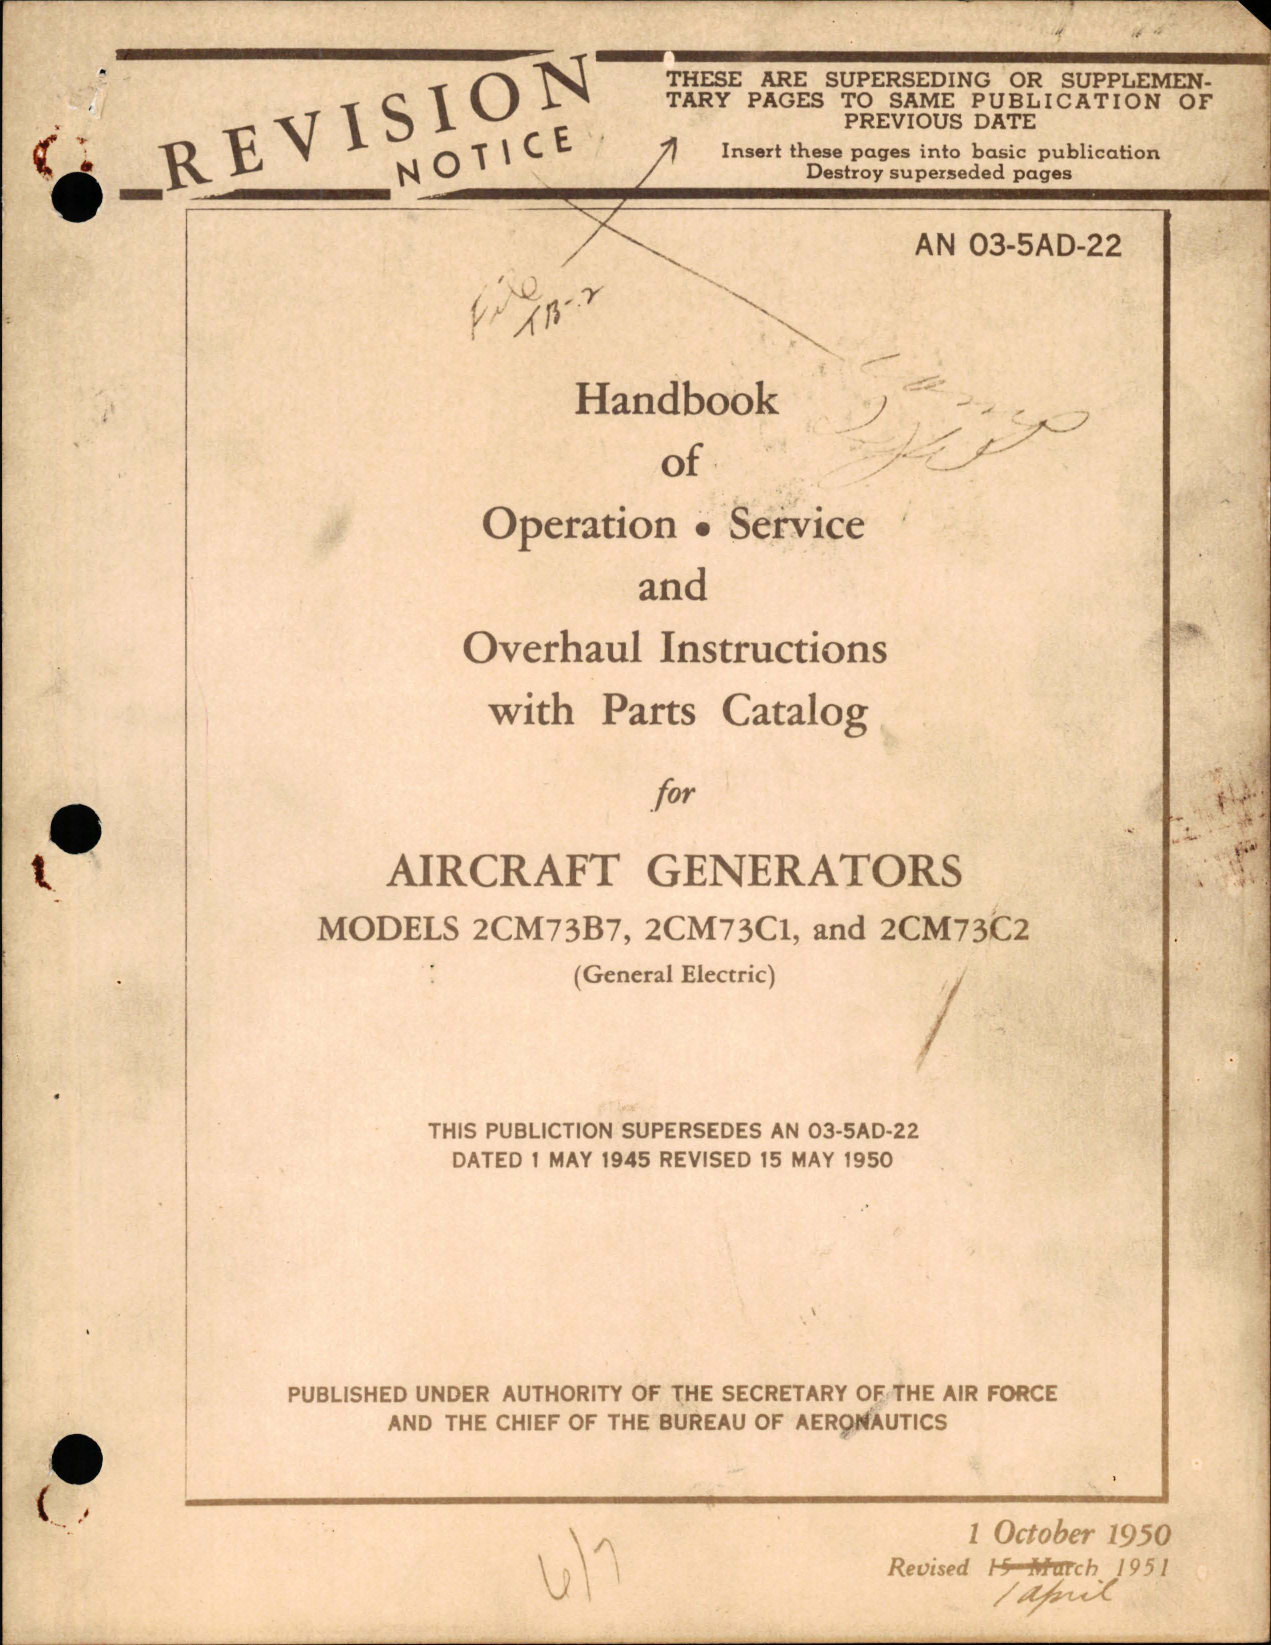 Sample page 1 from AirCorps Library document: Operation, Service, and Overhaul Instructions with Parts Catalog for Generators - Models 2CM73B7, 2CM73C1, and 2CM73C2